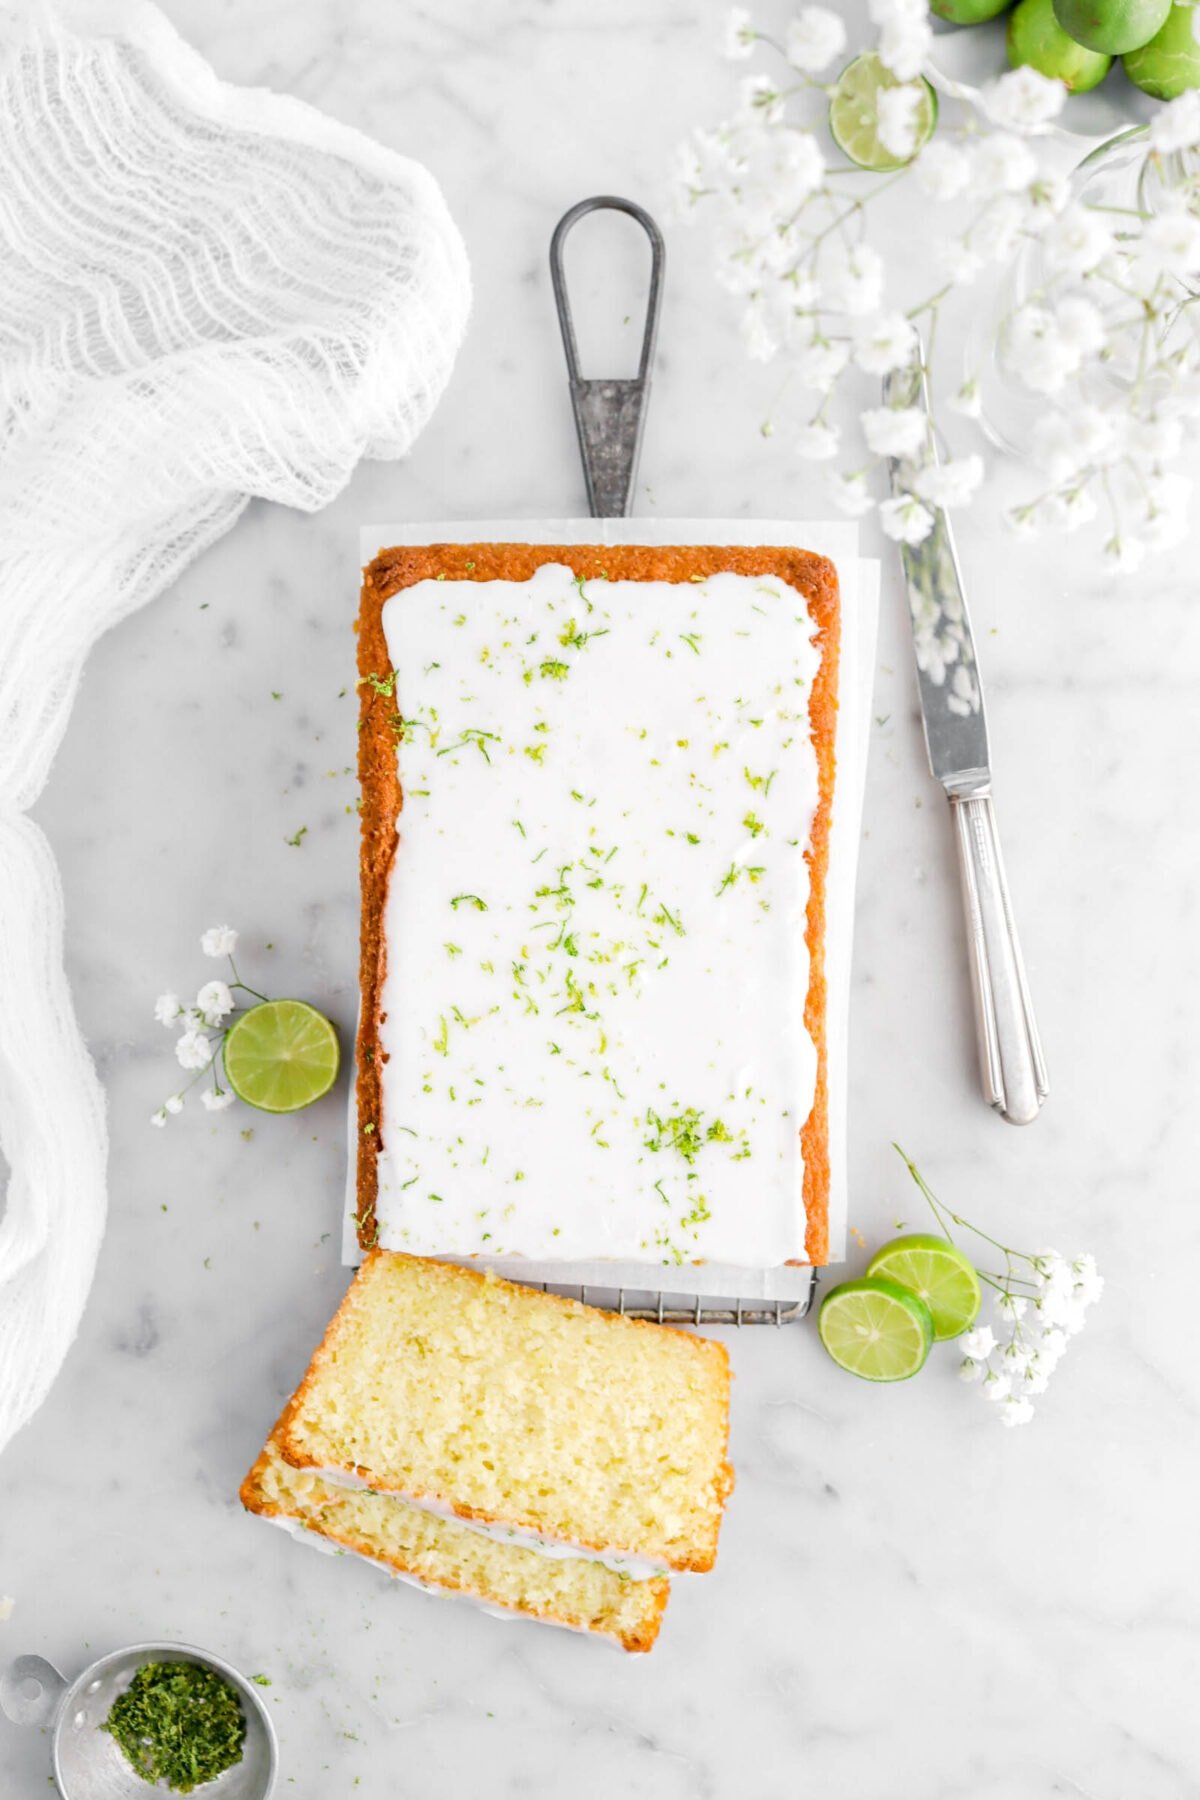 close up overhead shot of key lime pound cake with two slices laying in front with key limes around and white flowers, a white cheese cloth and a knife on either side of cake.